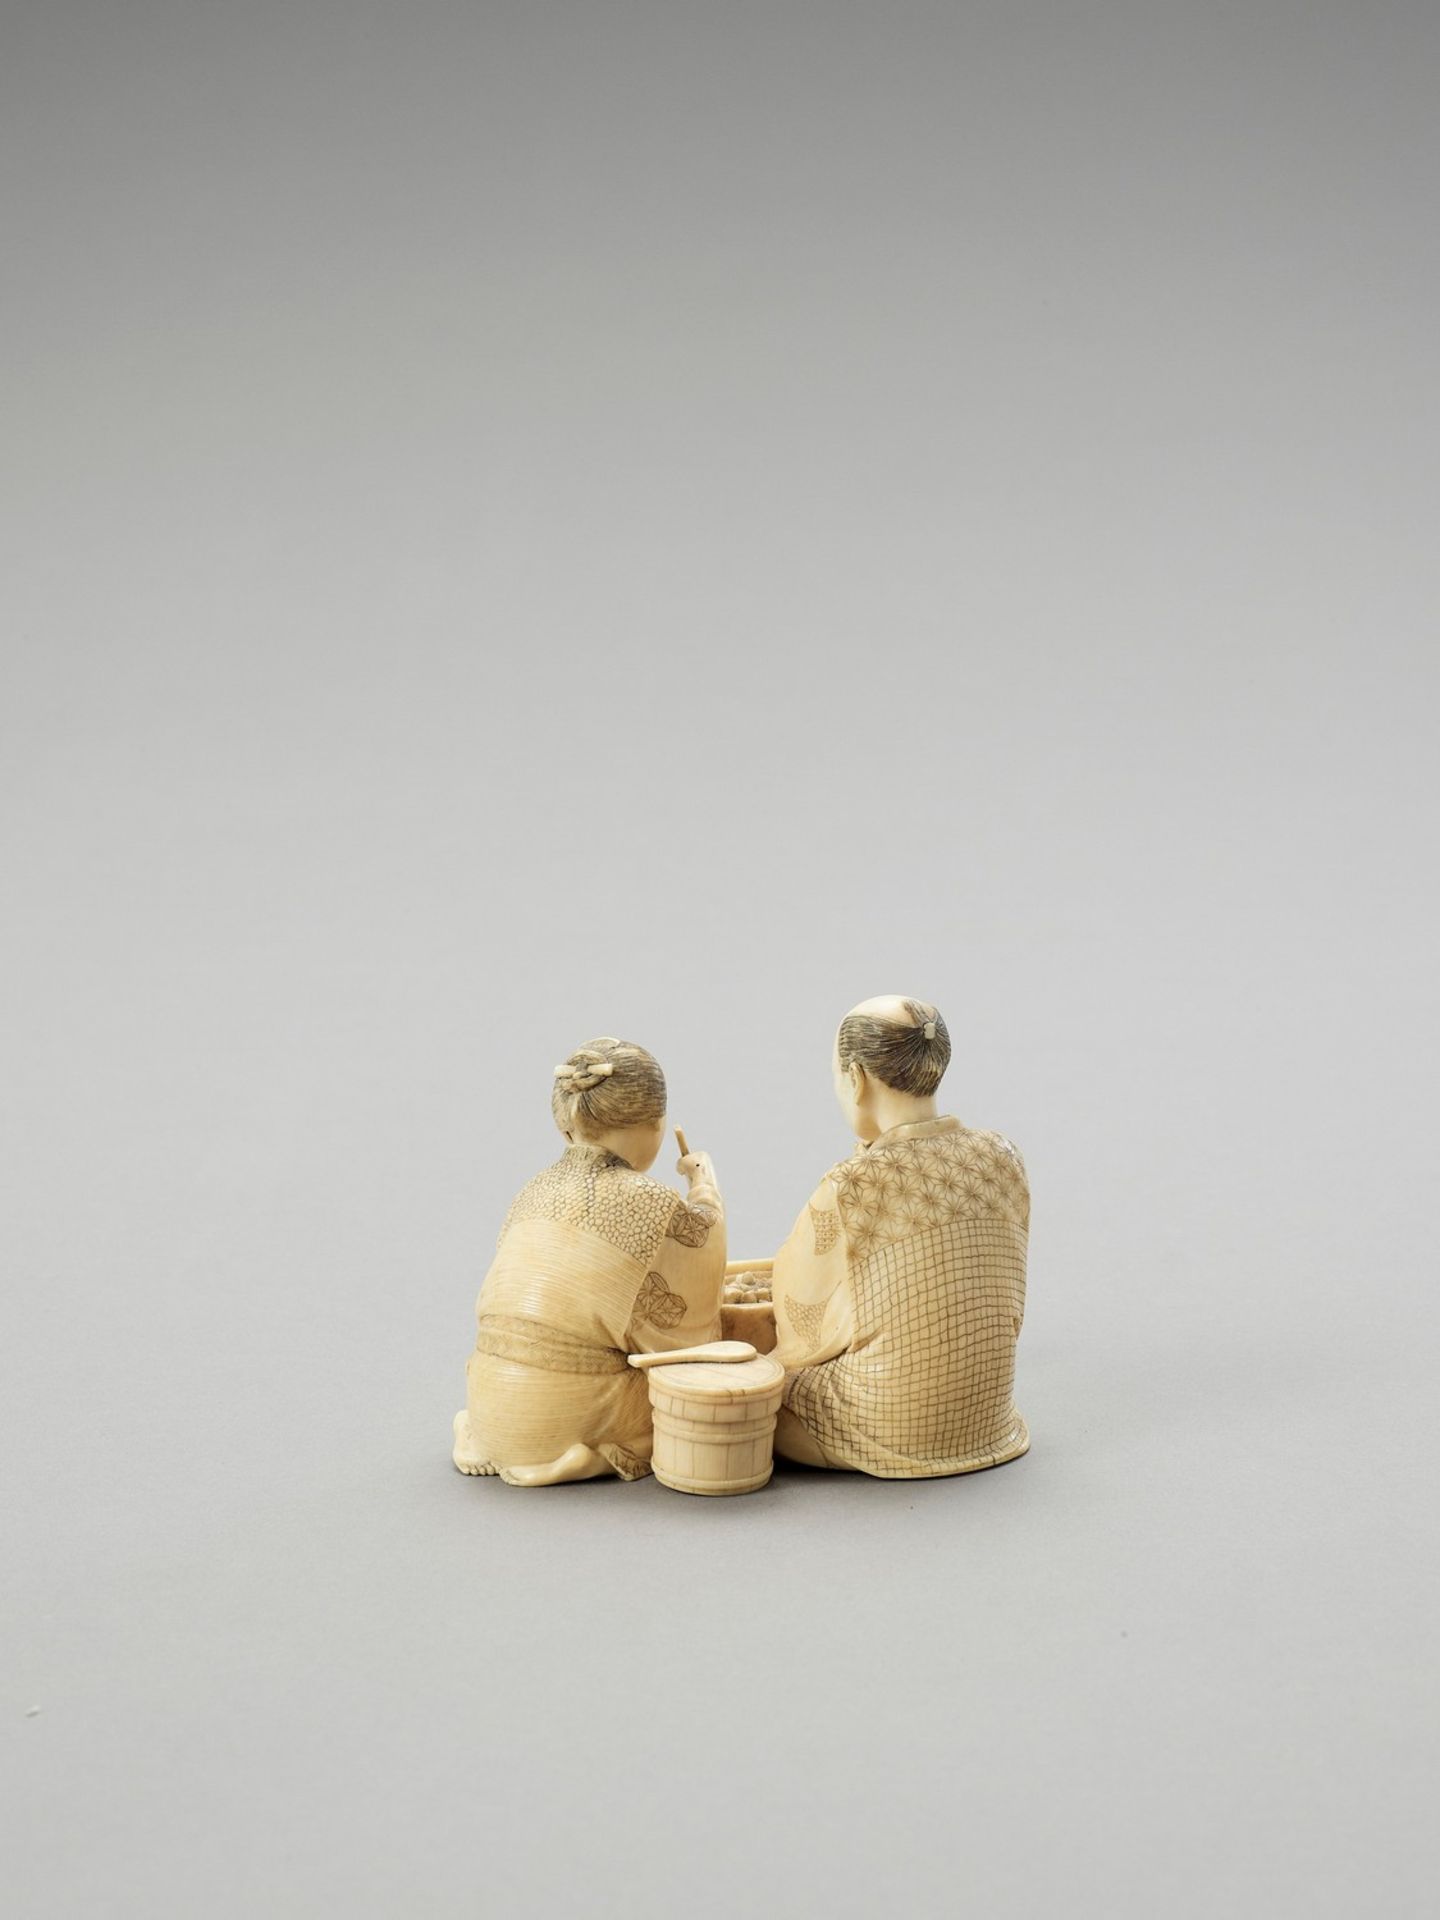 AN IVORY OKIMONO OF A COUPLE EATING - Image 4 of 5